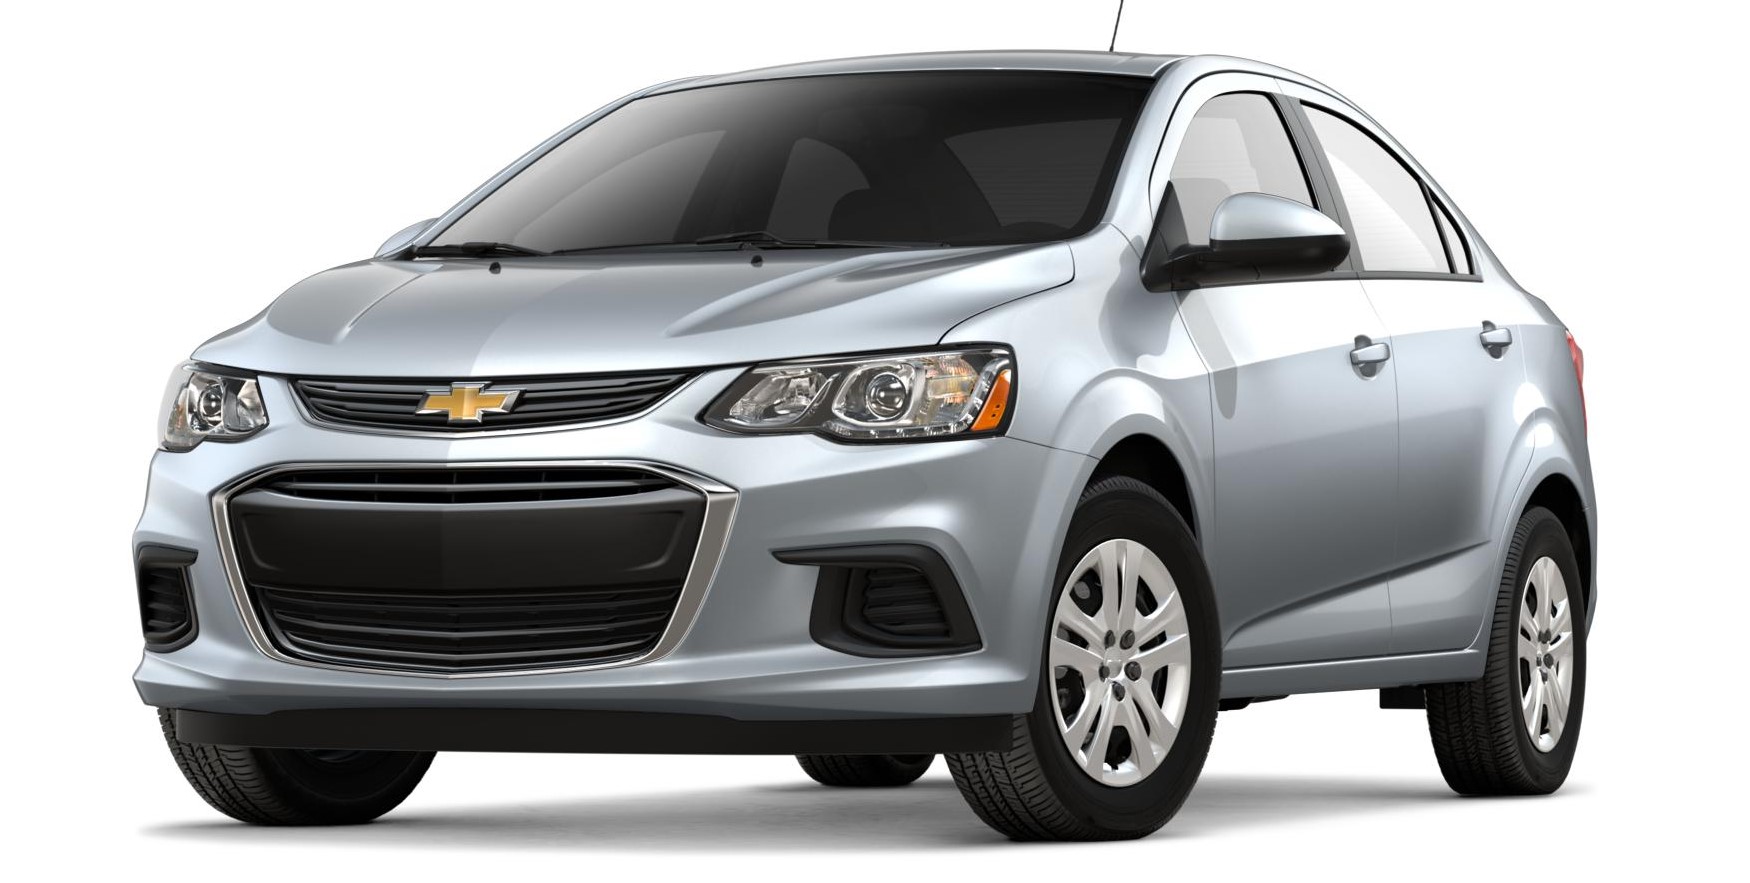 2018 Chevrolet Sonic Review Pricing and Specs